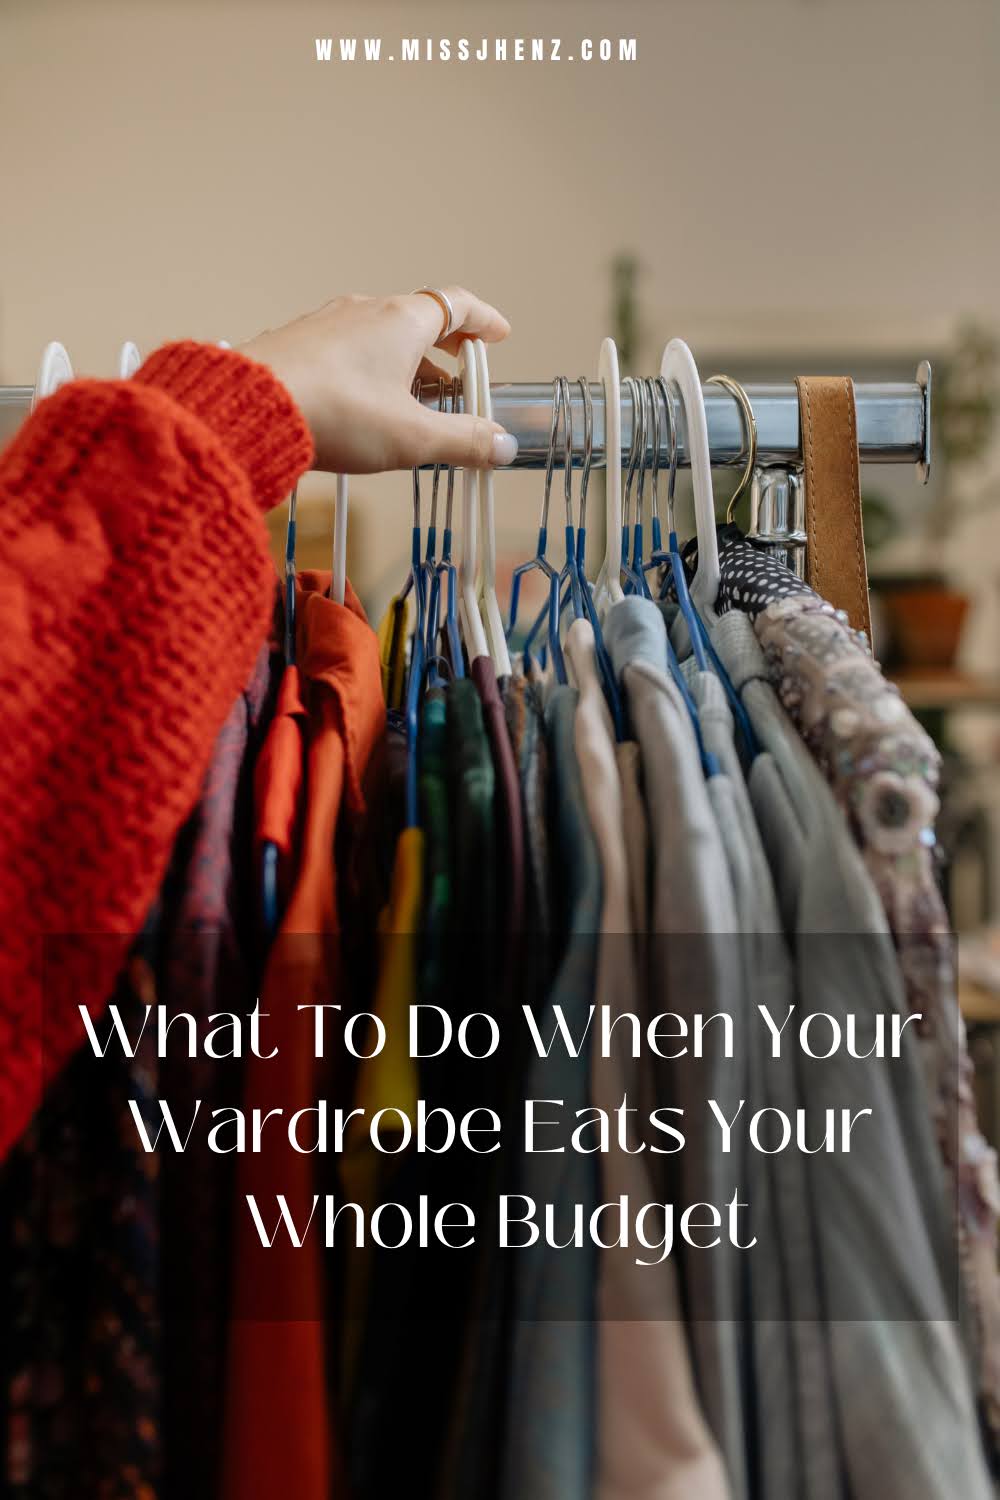 What To Do When Your Wardrobe Eats Your Whole Budget